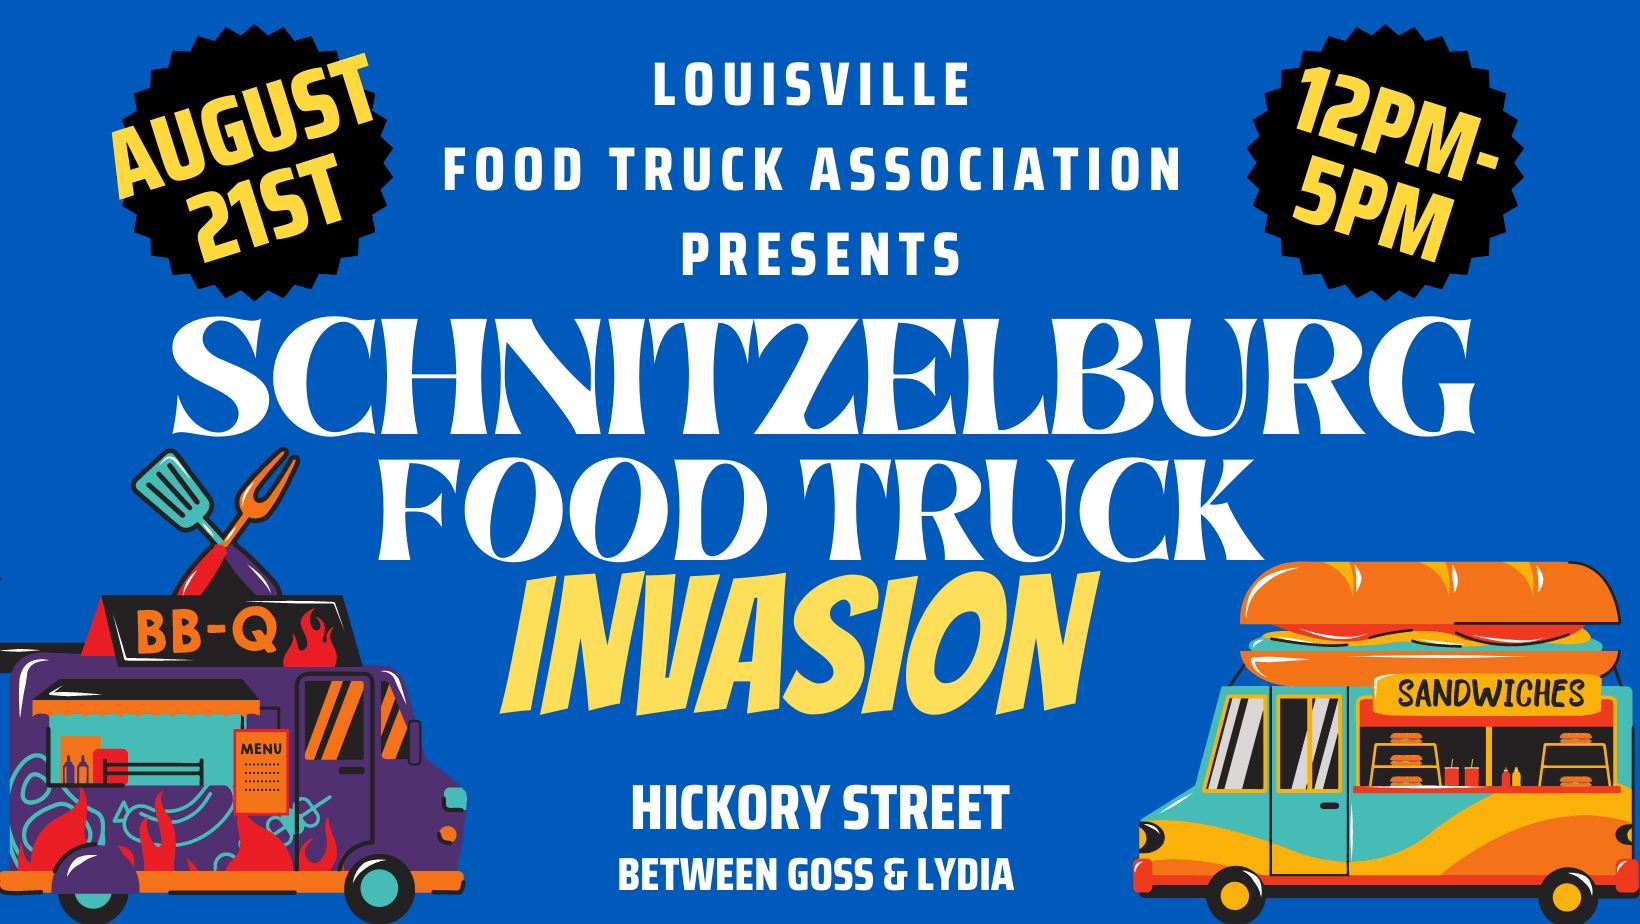 Schnitzelburg Food Truck “Invasion” is slated for Sunday, August 21